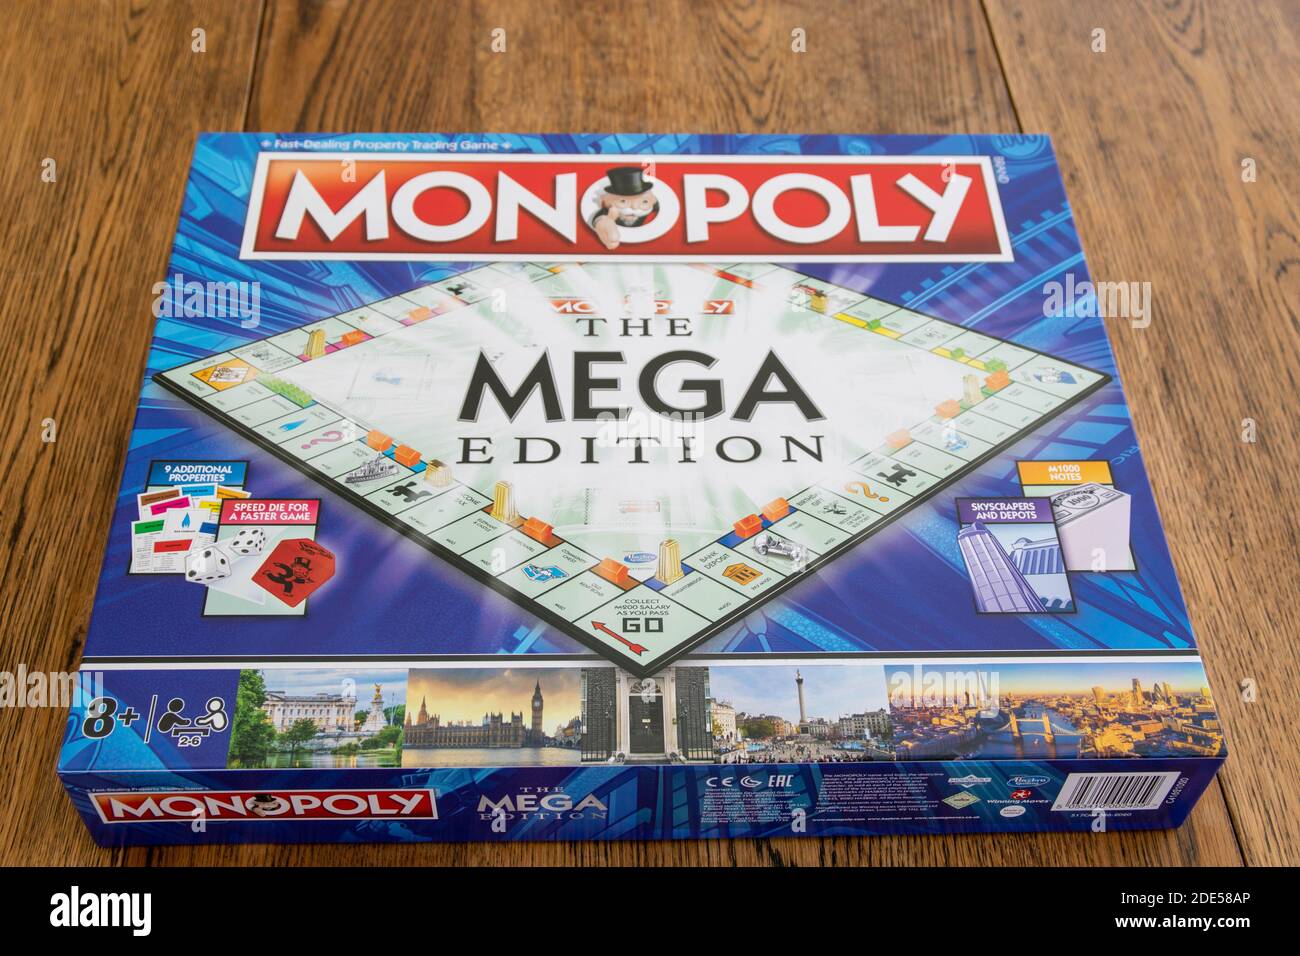 Durham, UK - 17th Nov 2020: Newley released Mega Edition Monopoly. New twist on classic fast-dealing property trading board game (Hasbro games). Finan Stock Photo